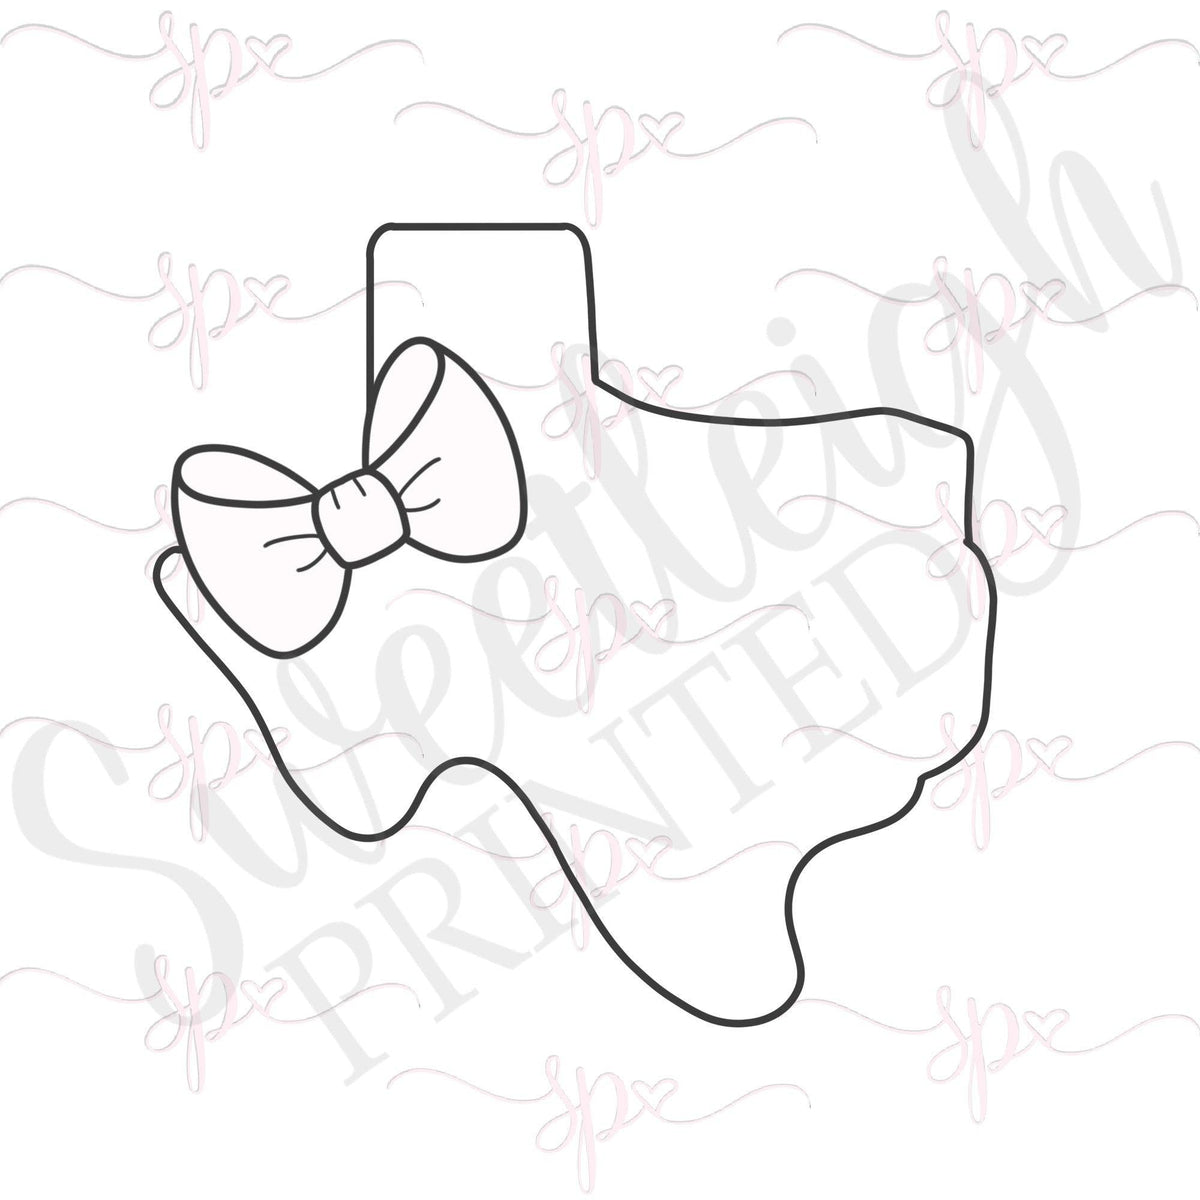 Girly Texas 2 Cookie Cutter - Sweetleigh 